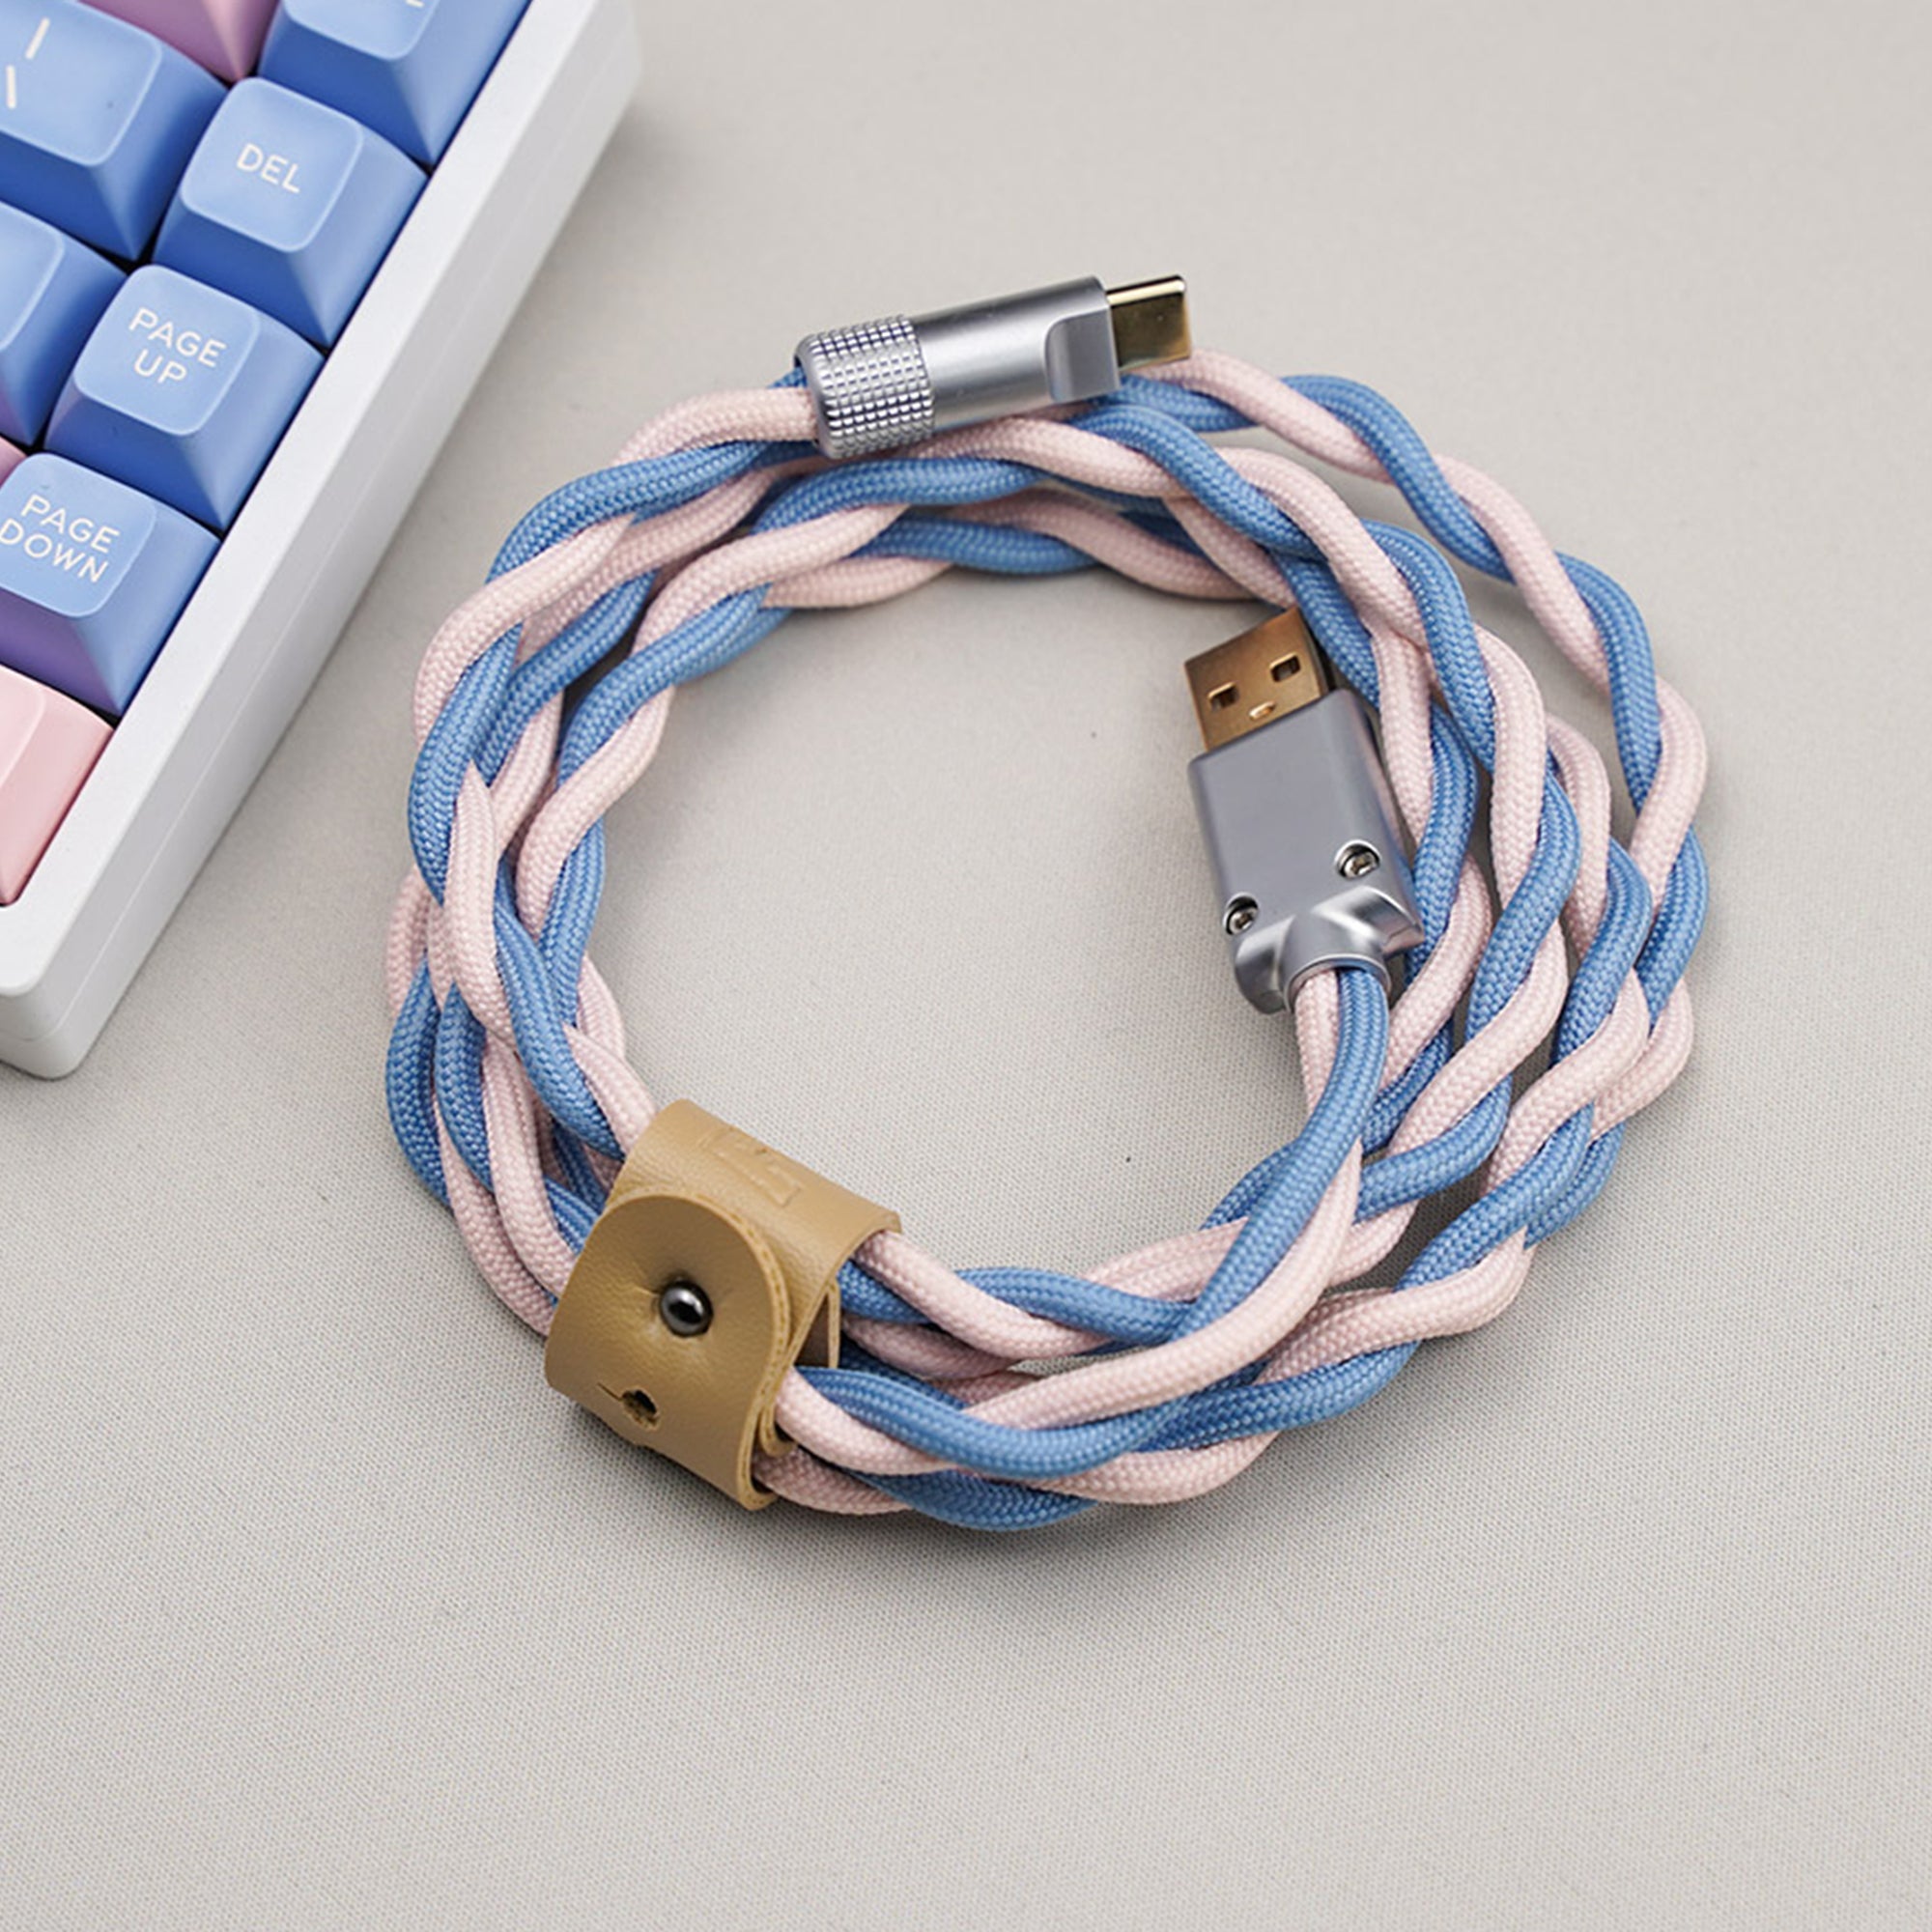 bubble-custom-handcrafted-mechanical-keyboard-cable